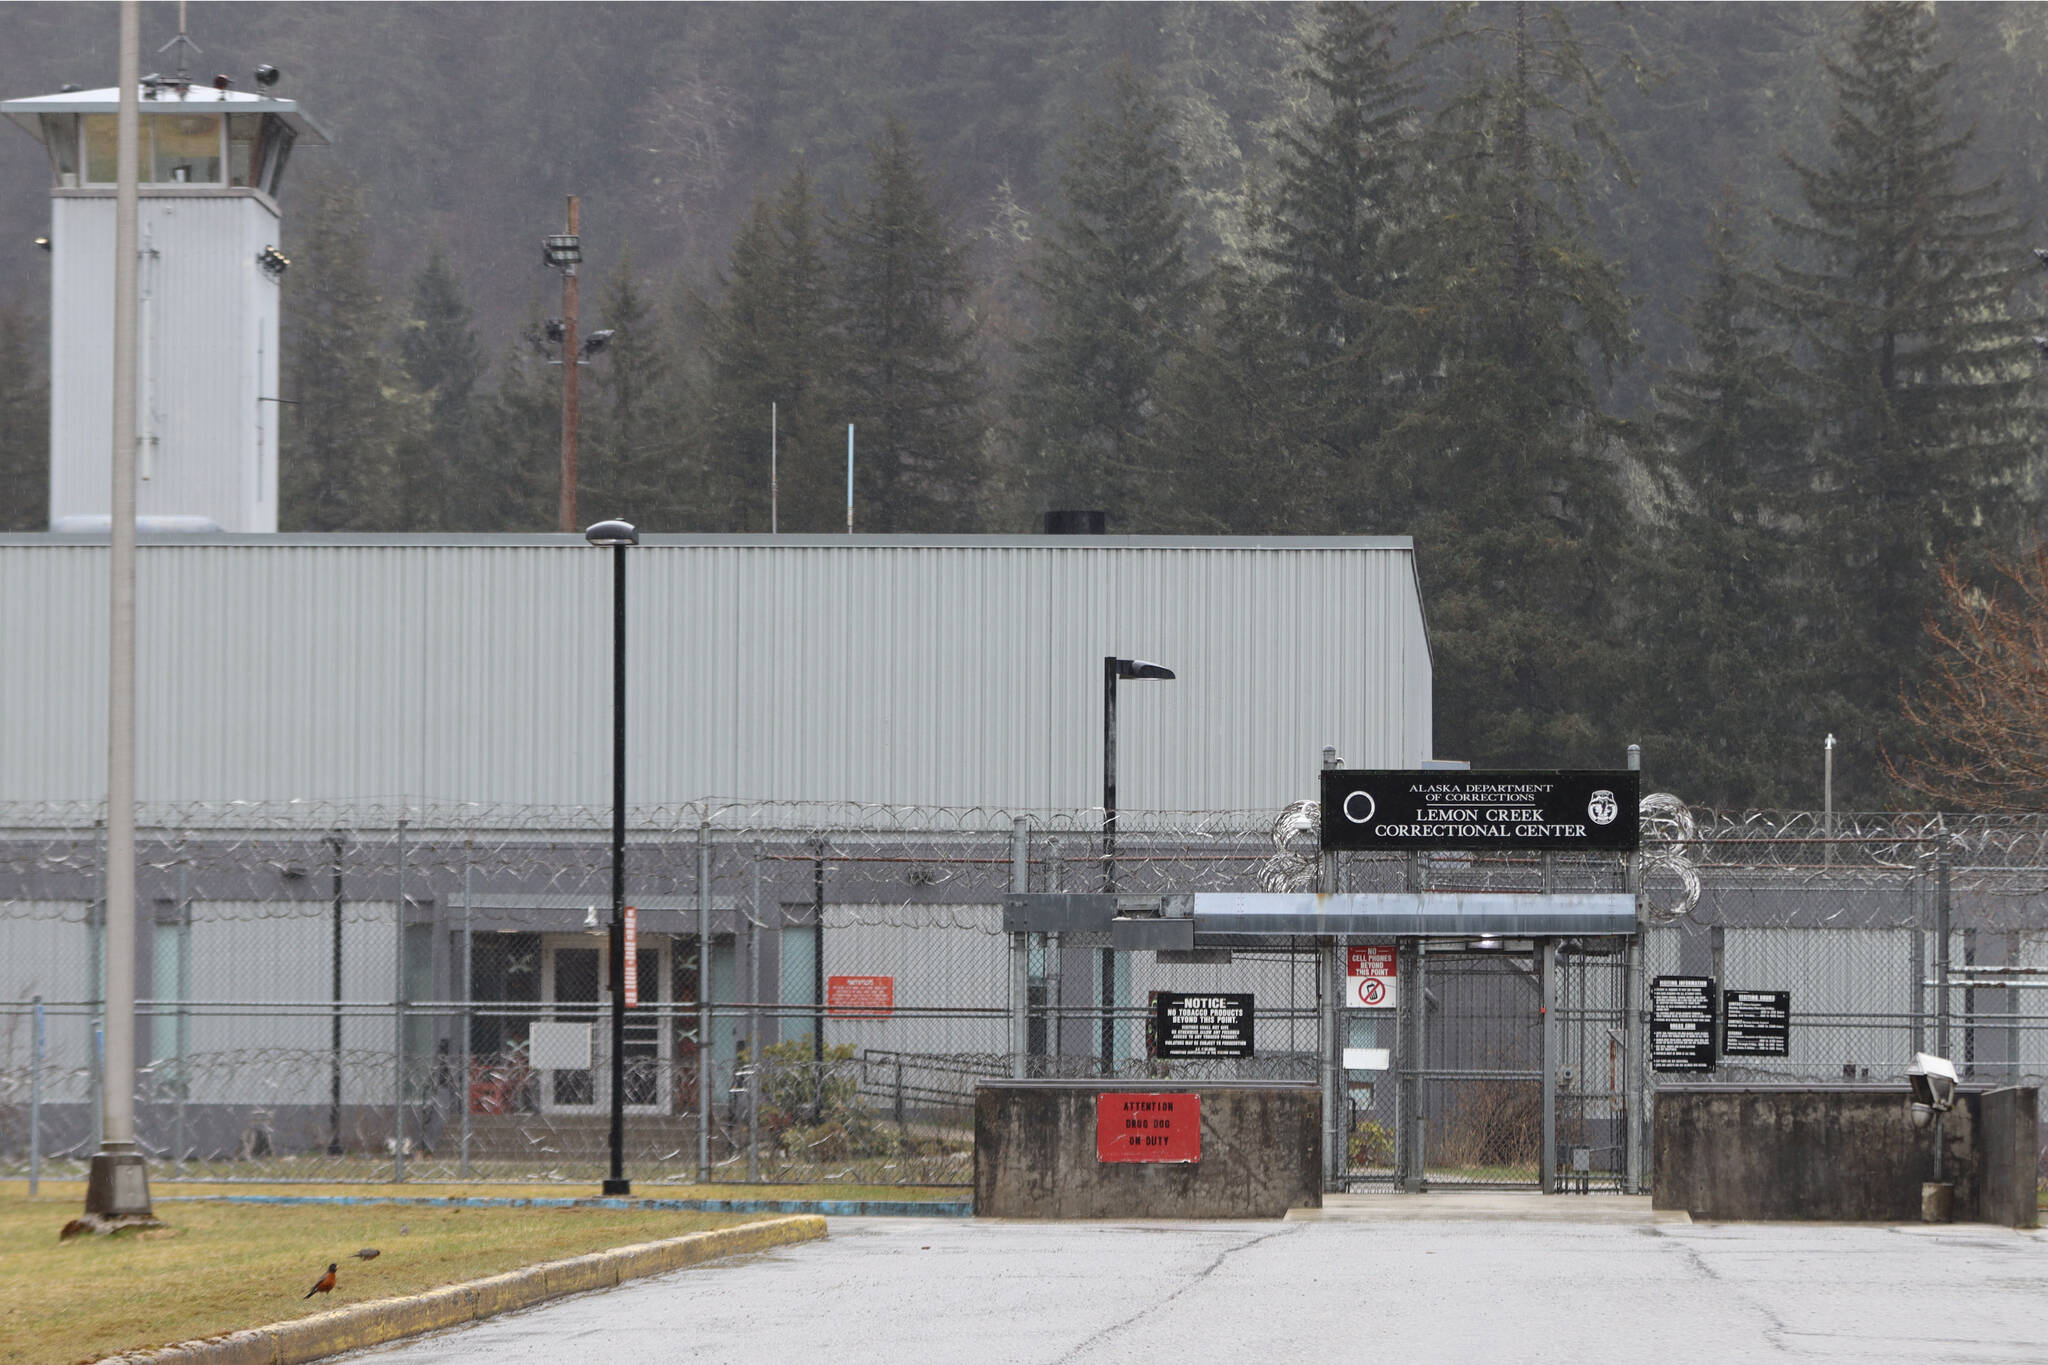 This Wednesday, April 26, 2023, photo shows Lemon Creek Correctional Center, where an incarcerated man was found hanging in his cell Saturday. The man, Mark Cook Jr. of Hoonah was later pronounced dead. Cook’s family expressed concerns that his death by suicide was preventable. (Jonson Kuhn / Juneau Empire)